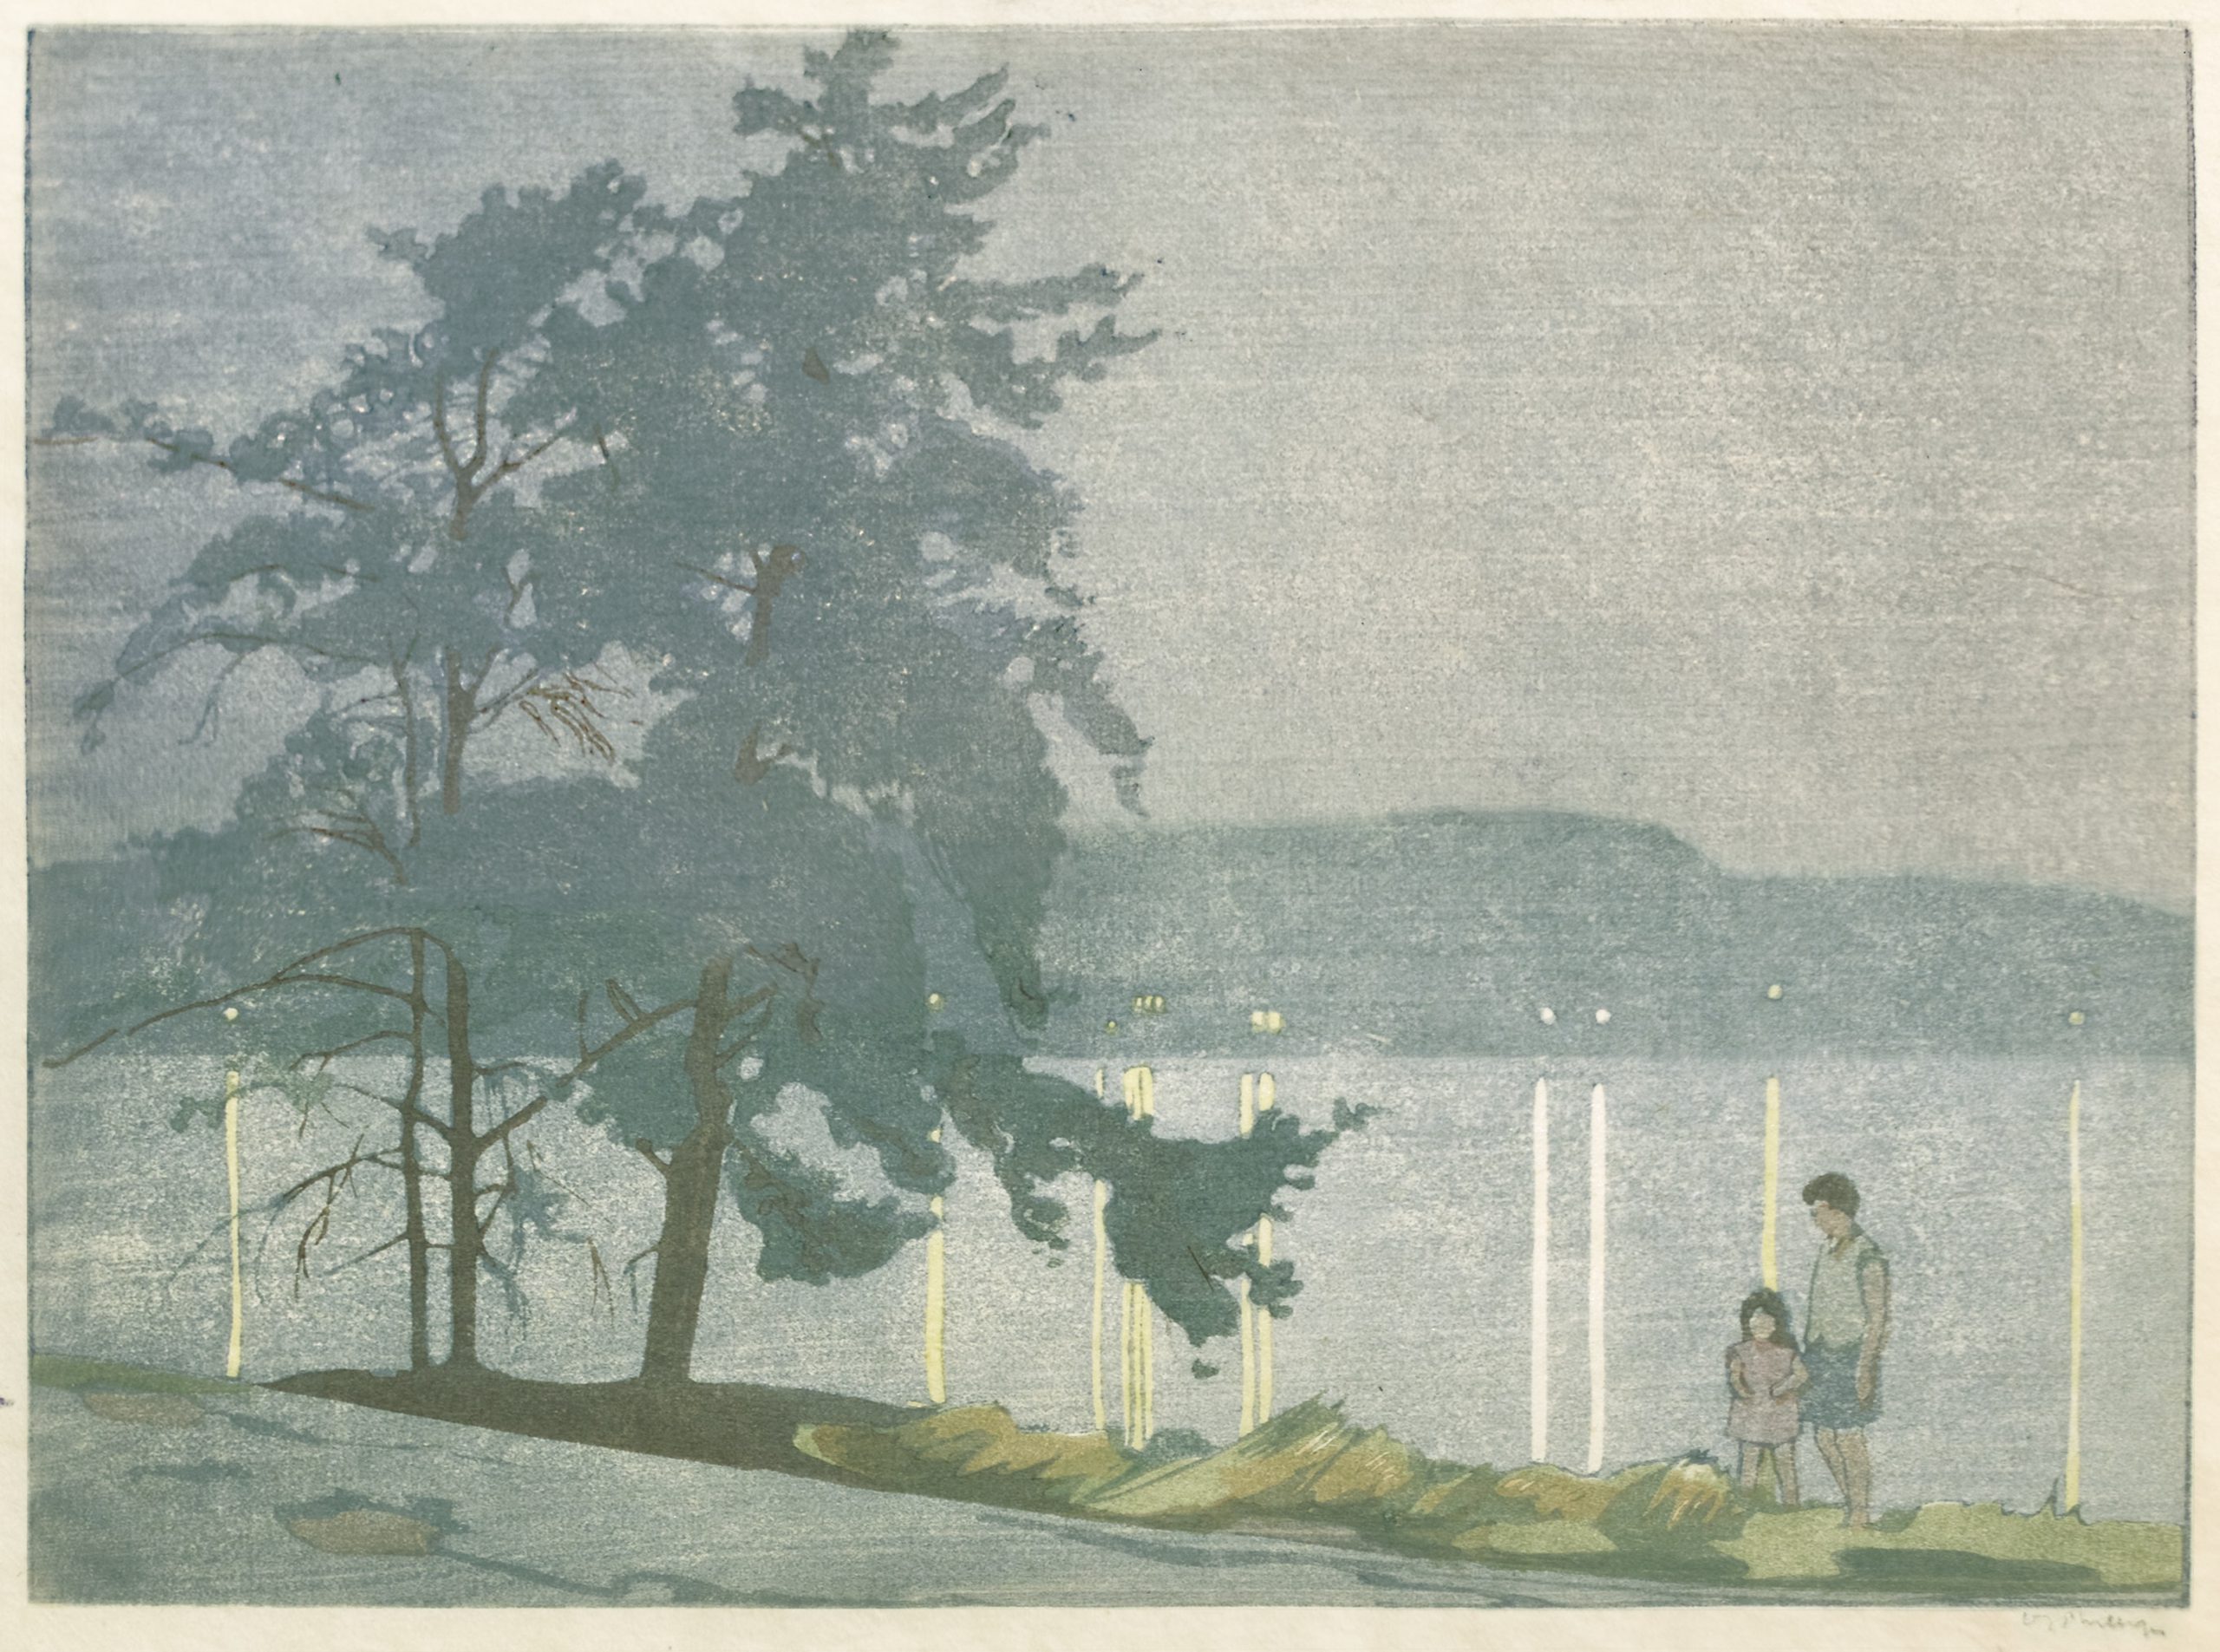 W.J. Phillips (1884-1963) SUMMER NIGHT, 1931 Edition of 200 Woodblock Print 17.7 x 24.1 cm or 7" x 9 7/16"  Framed size: 15" x 17 7/16"